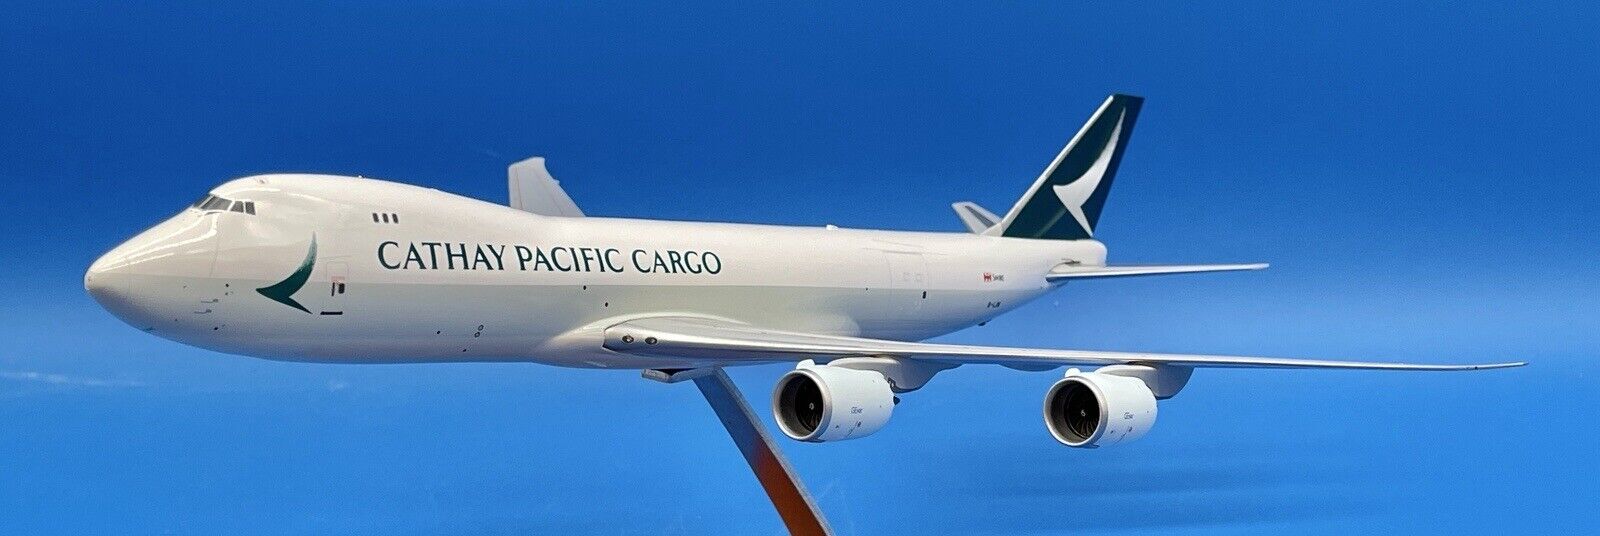 JC Wings Cathay Pacific Cargo Boeing 747-8F  1:200 XX2413